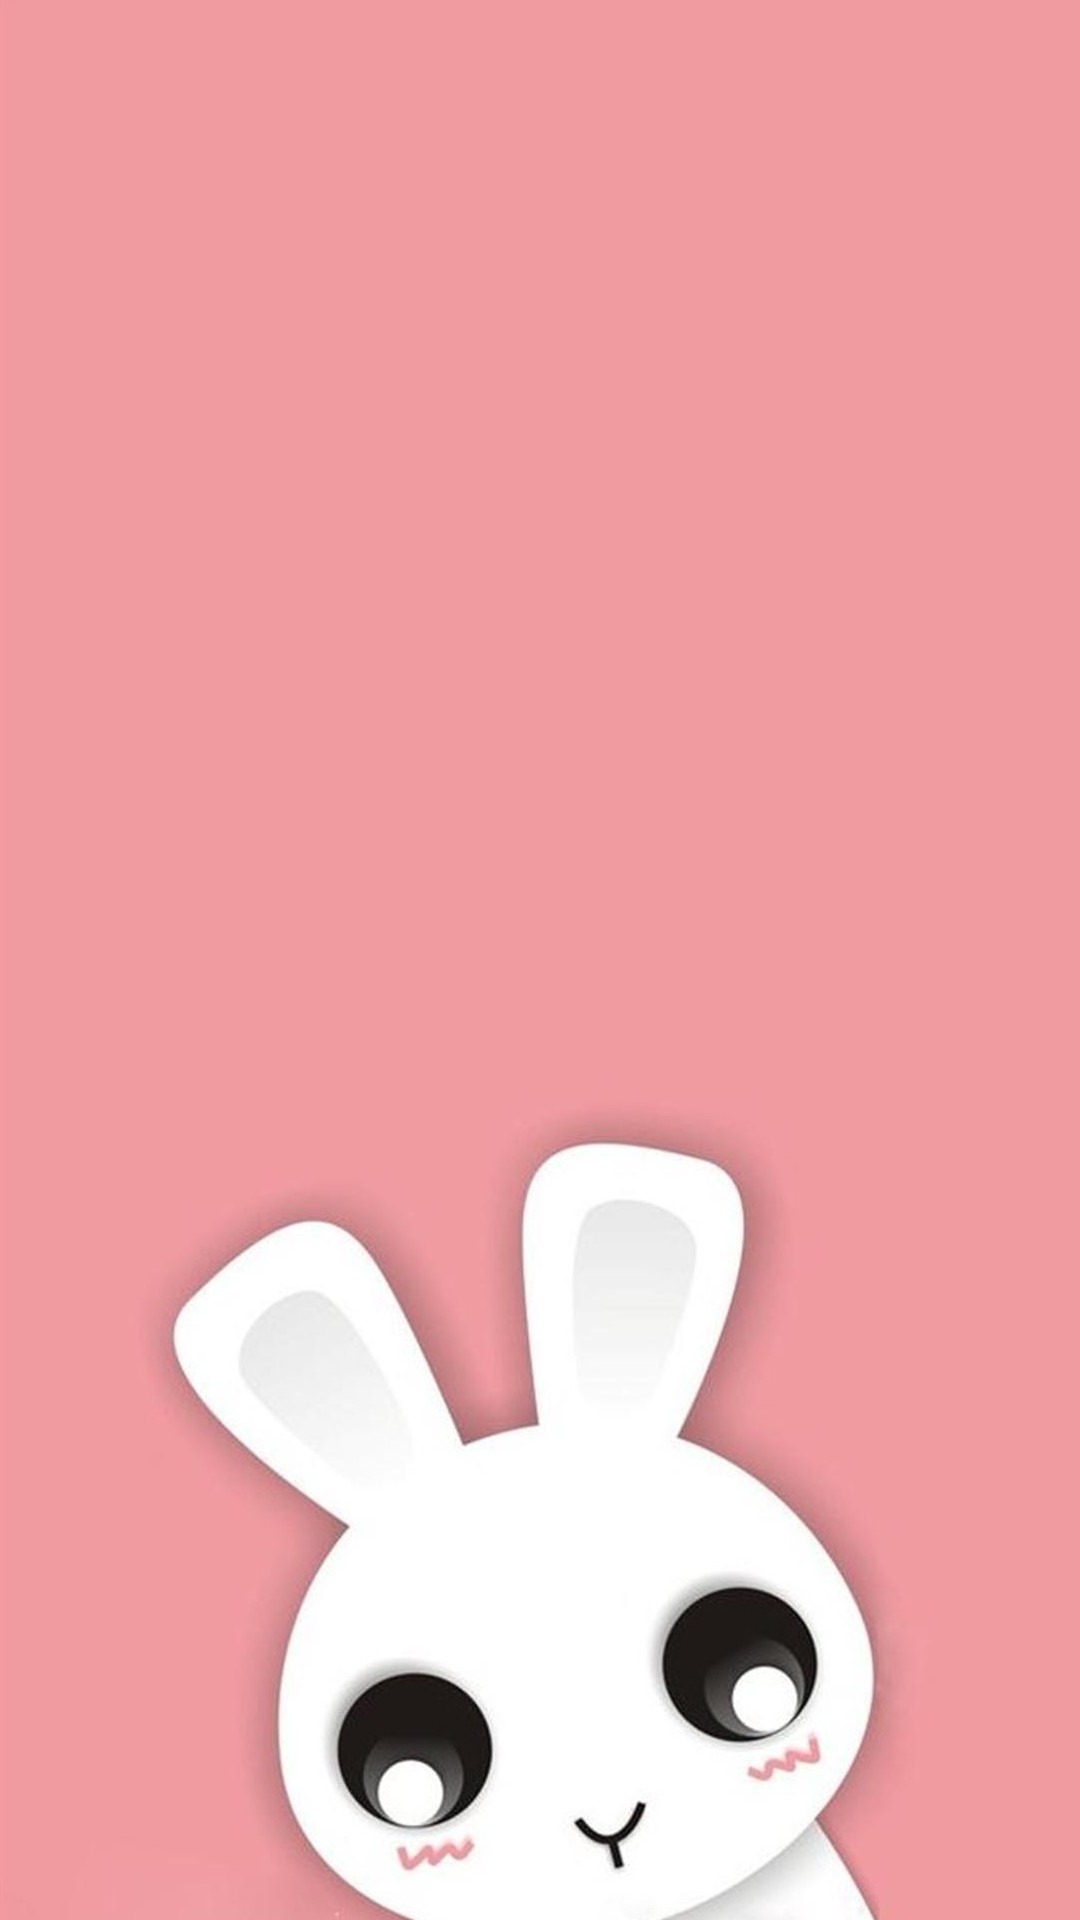 Cute wallpaper for android